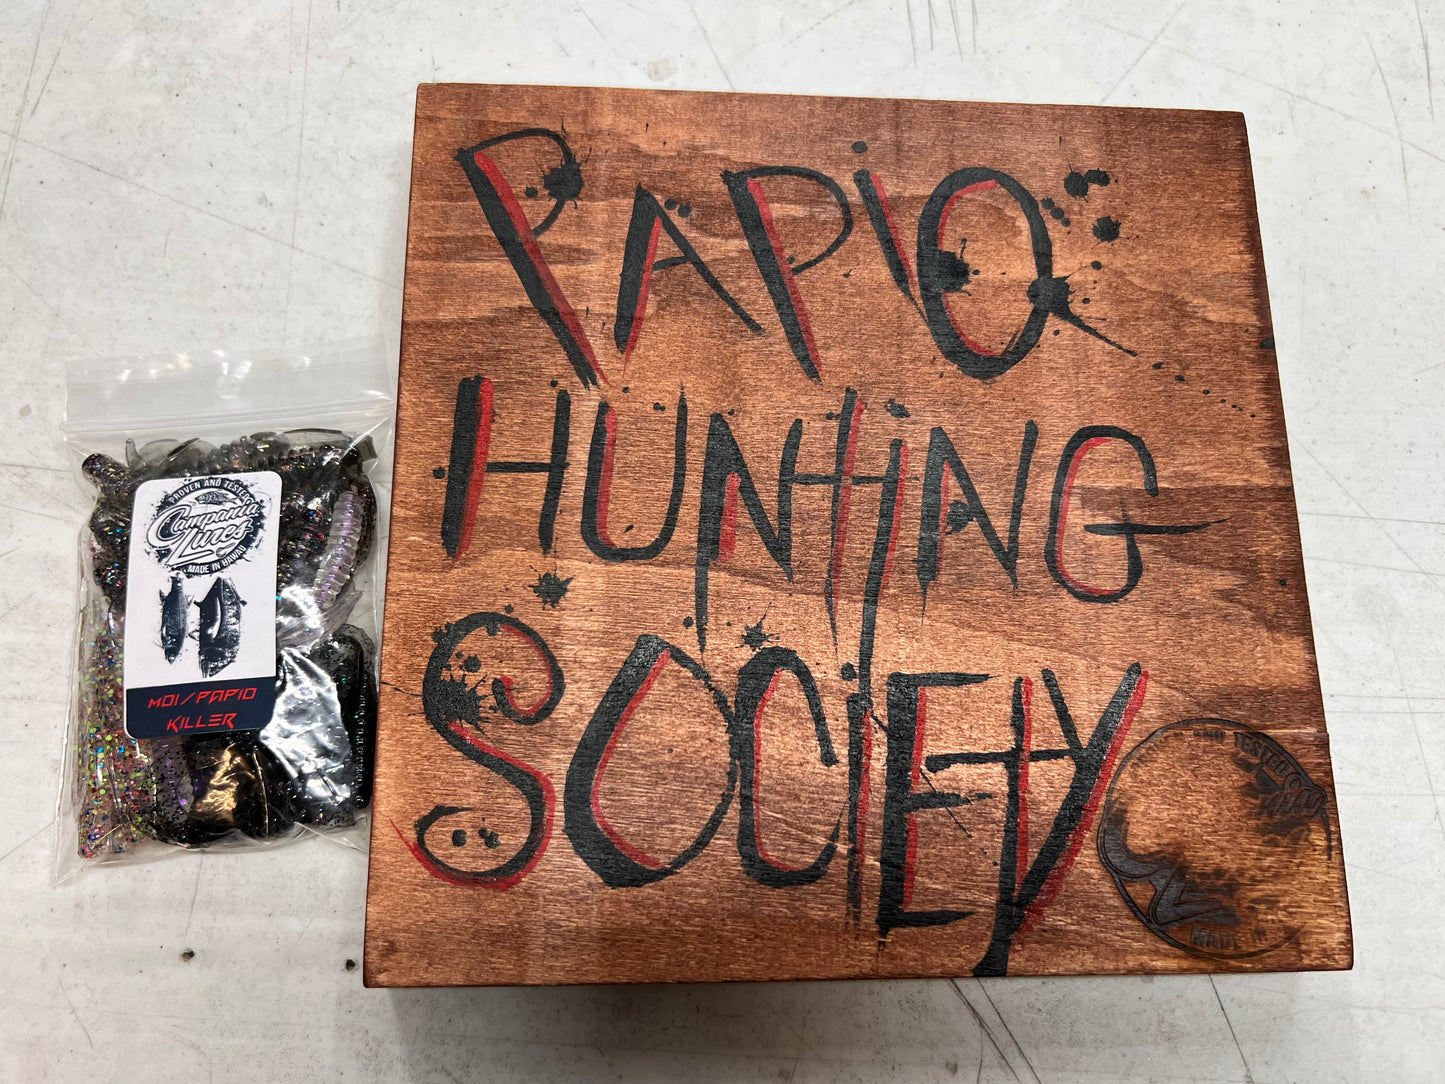 8"x8" Papio Hunting Society (stained wood Panel) and Moi/Papio Killer pack combo.